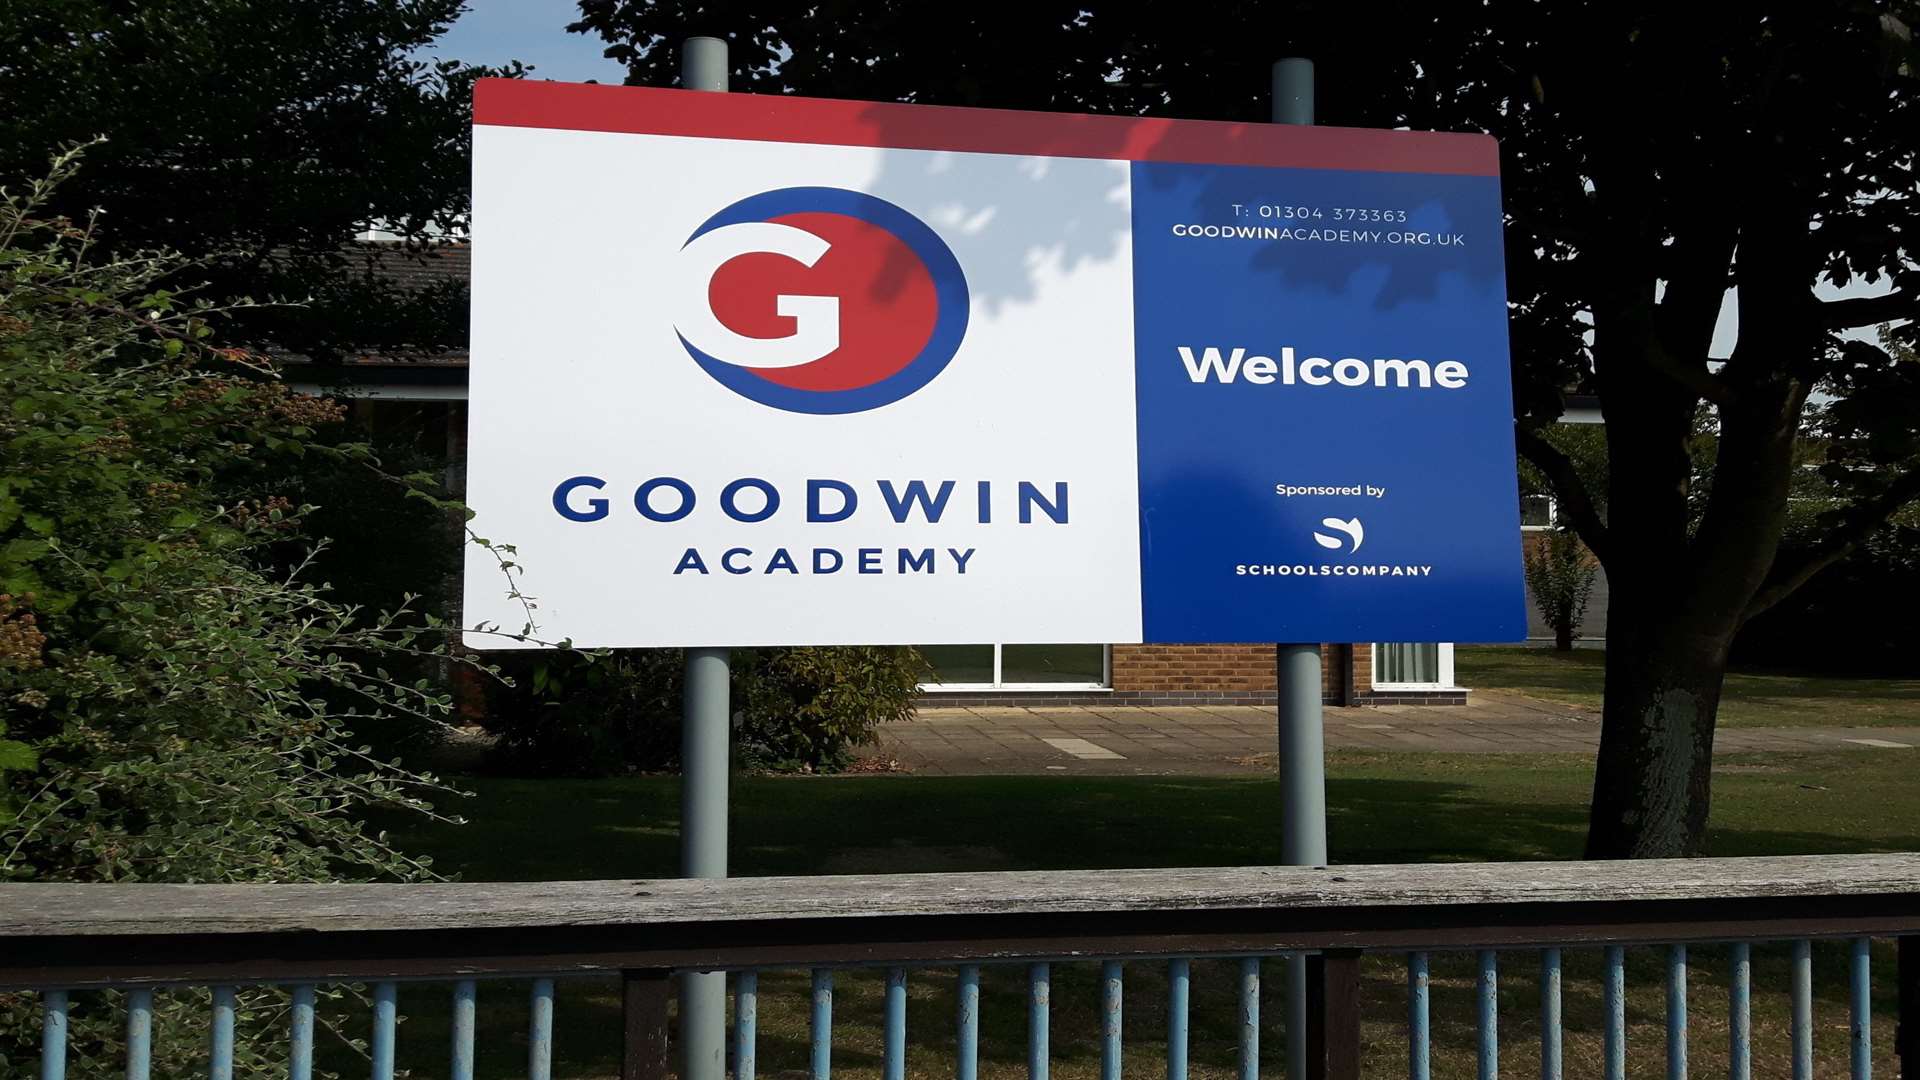 The event was held at Goodwin Academy's playing fields